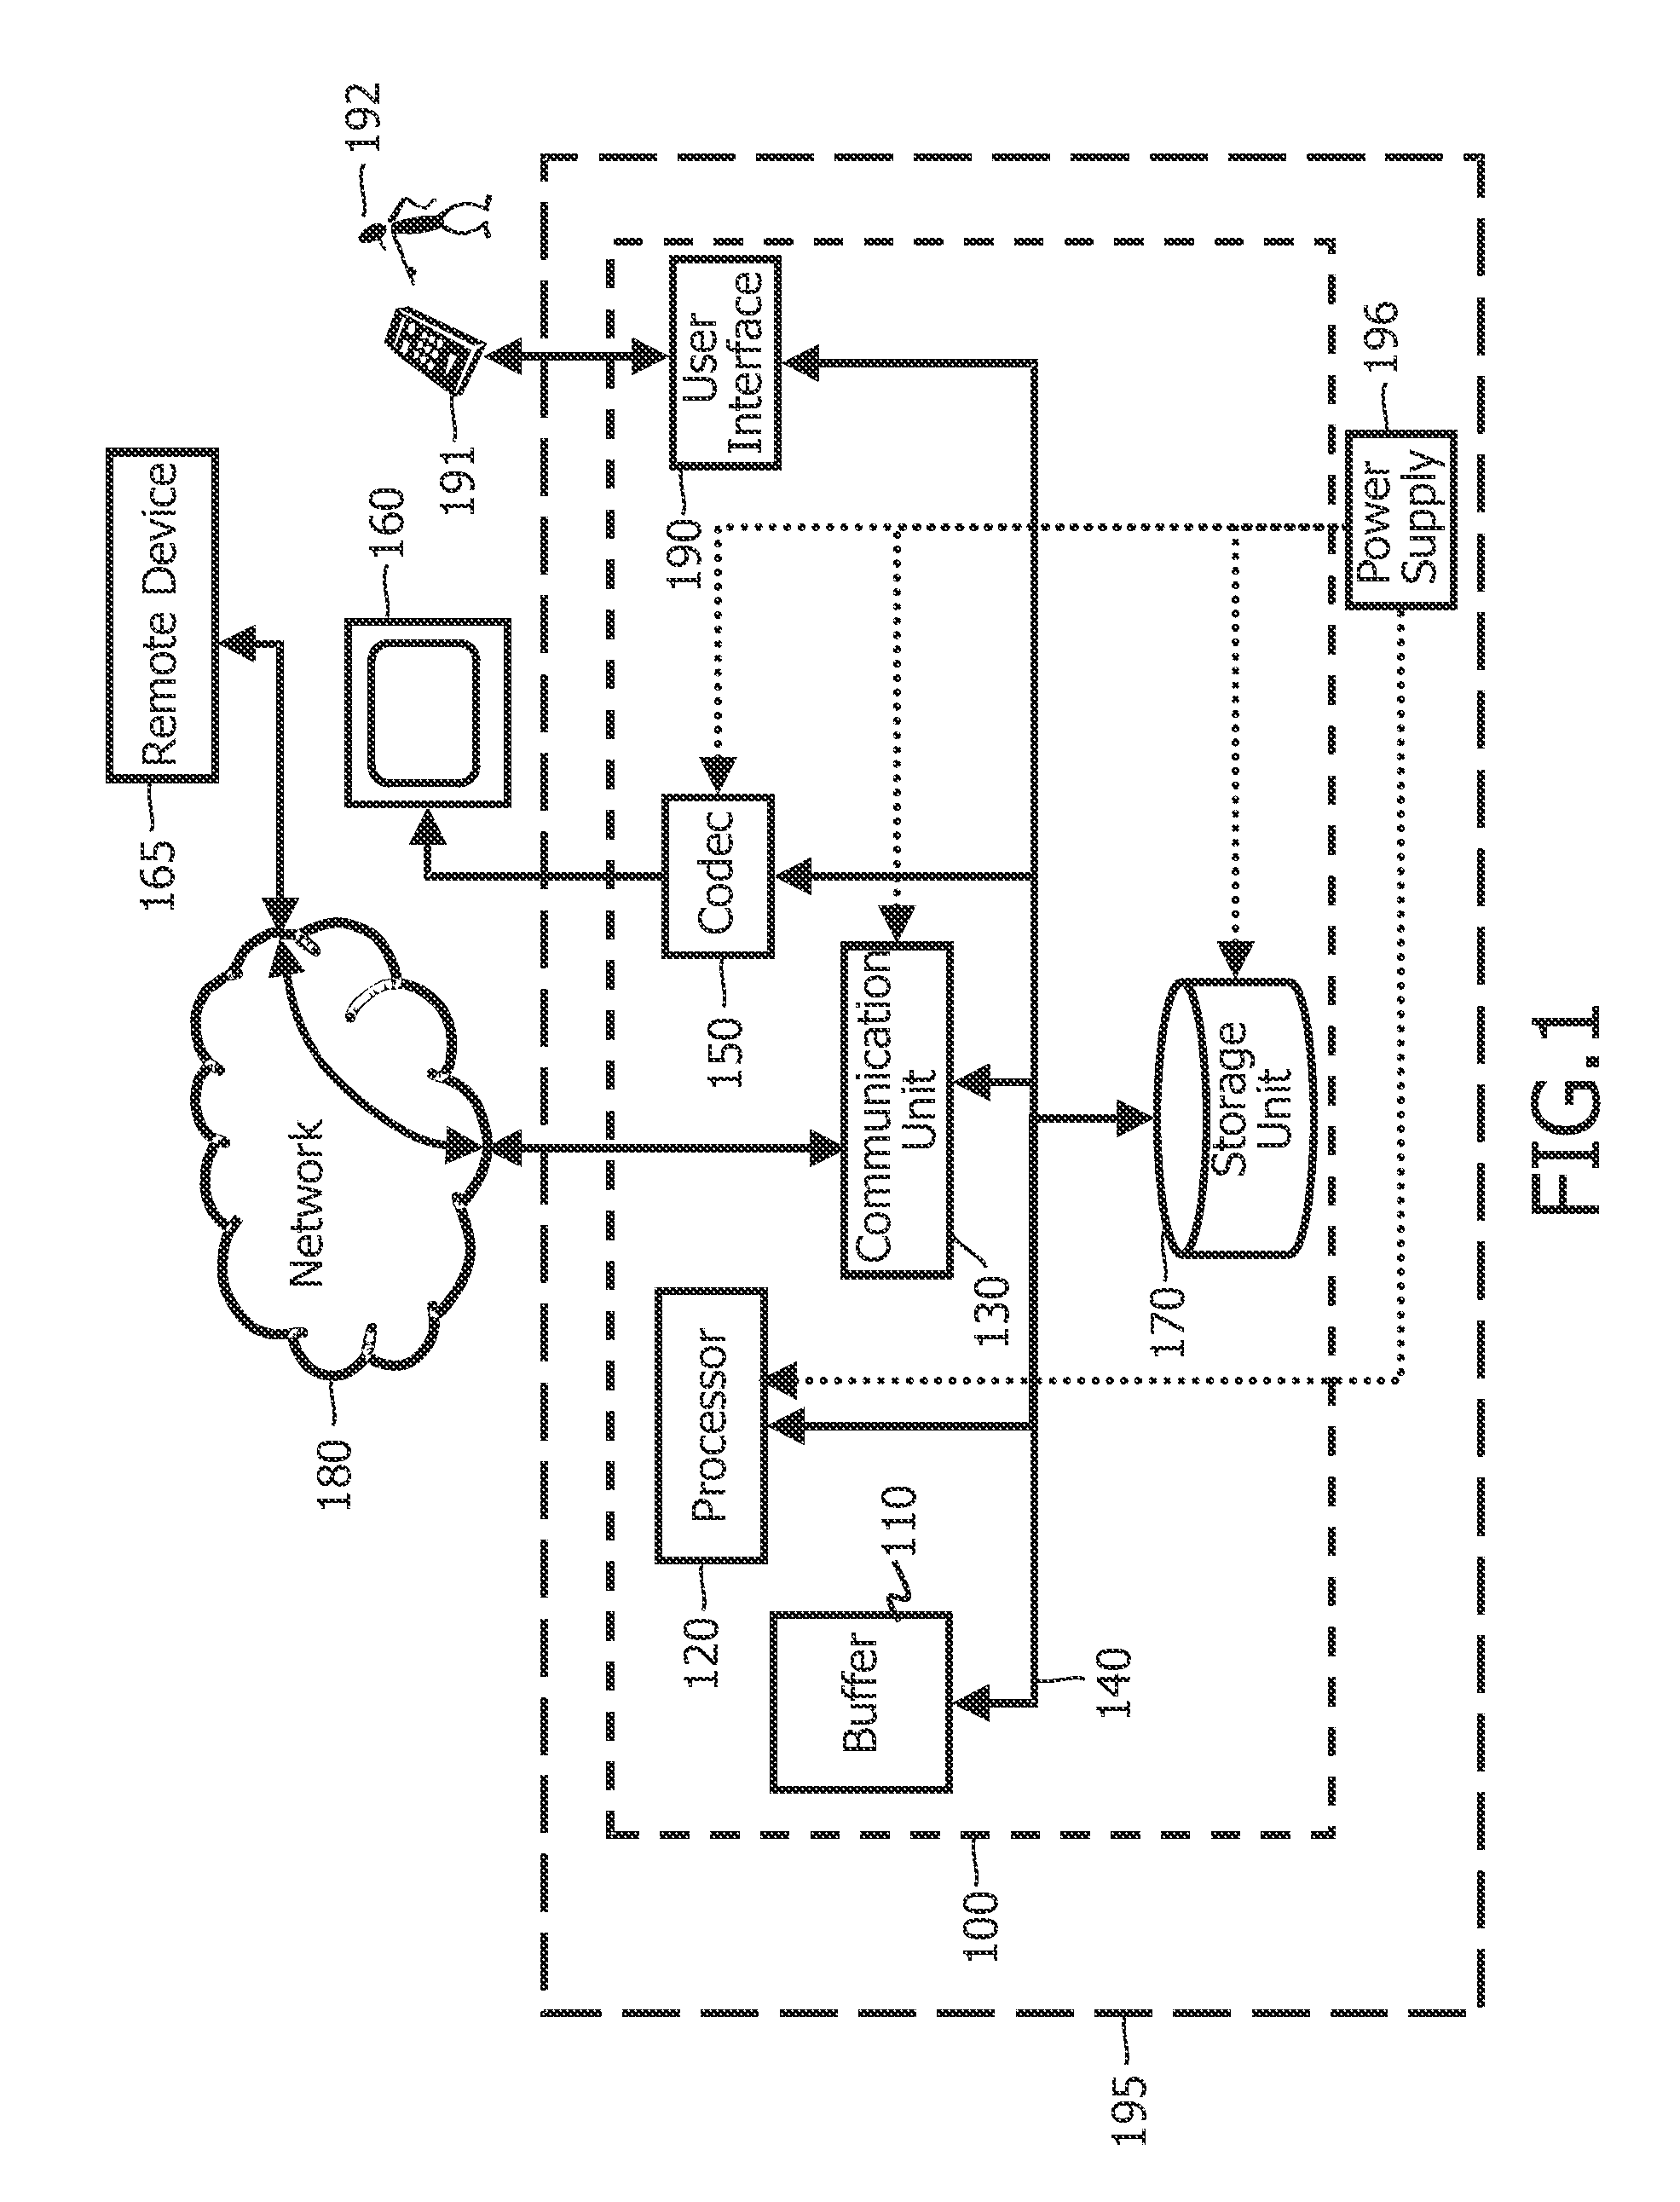 Device and a method for managing power consumption of a plurality of data processing units